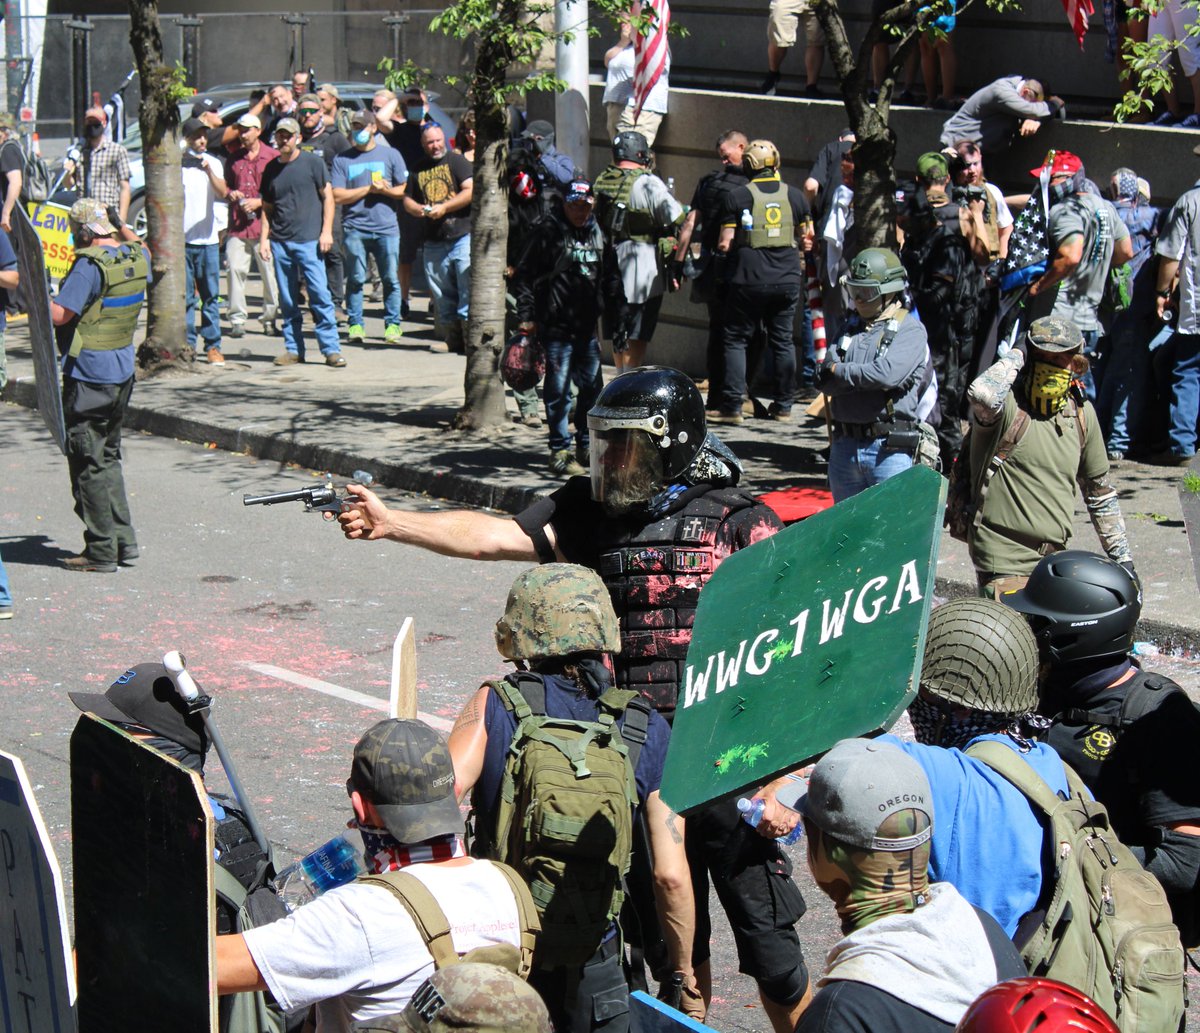 Right wing protester with a cocked gun aimed at BLM protesters in Portland today.